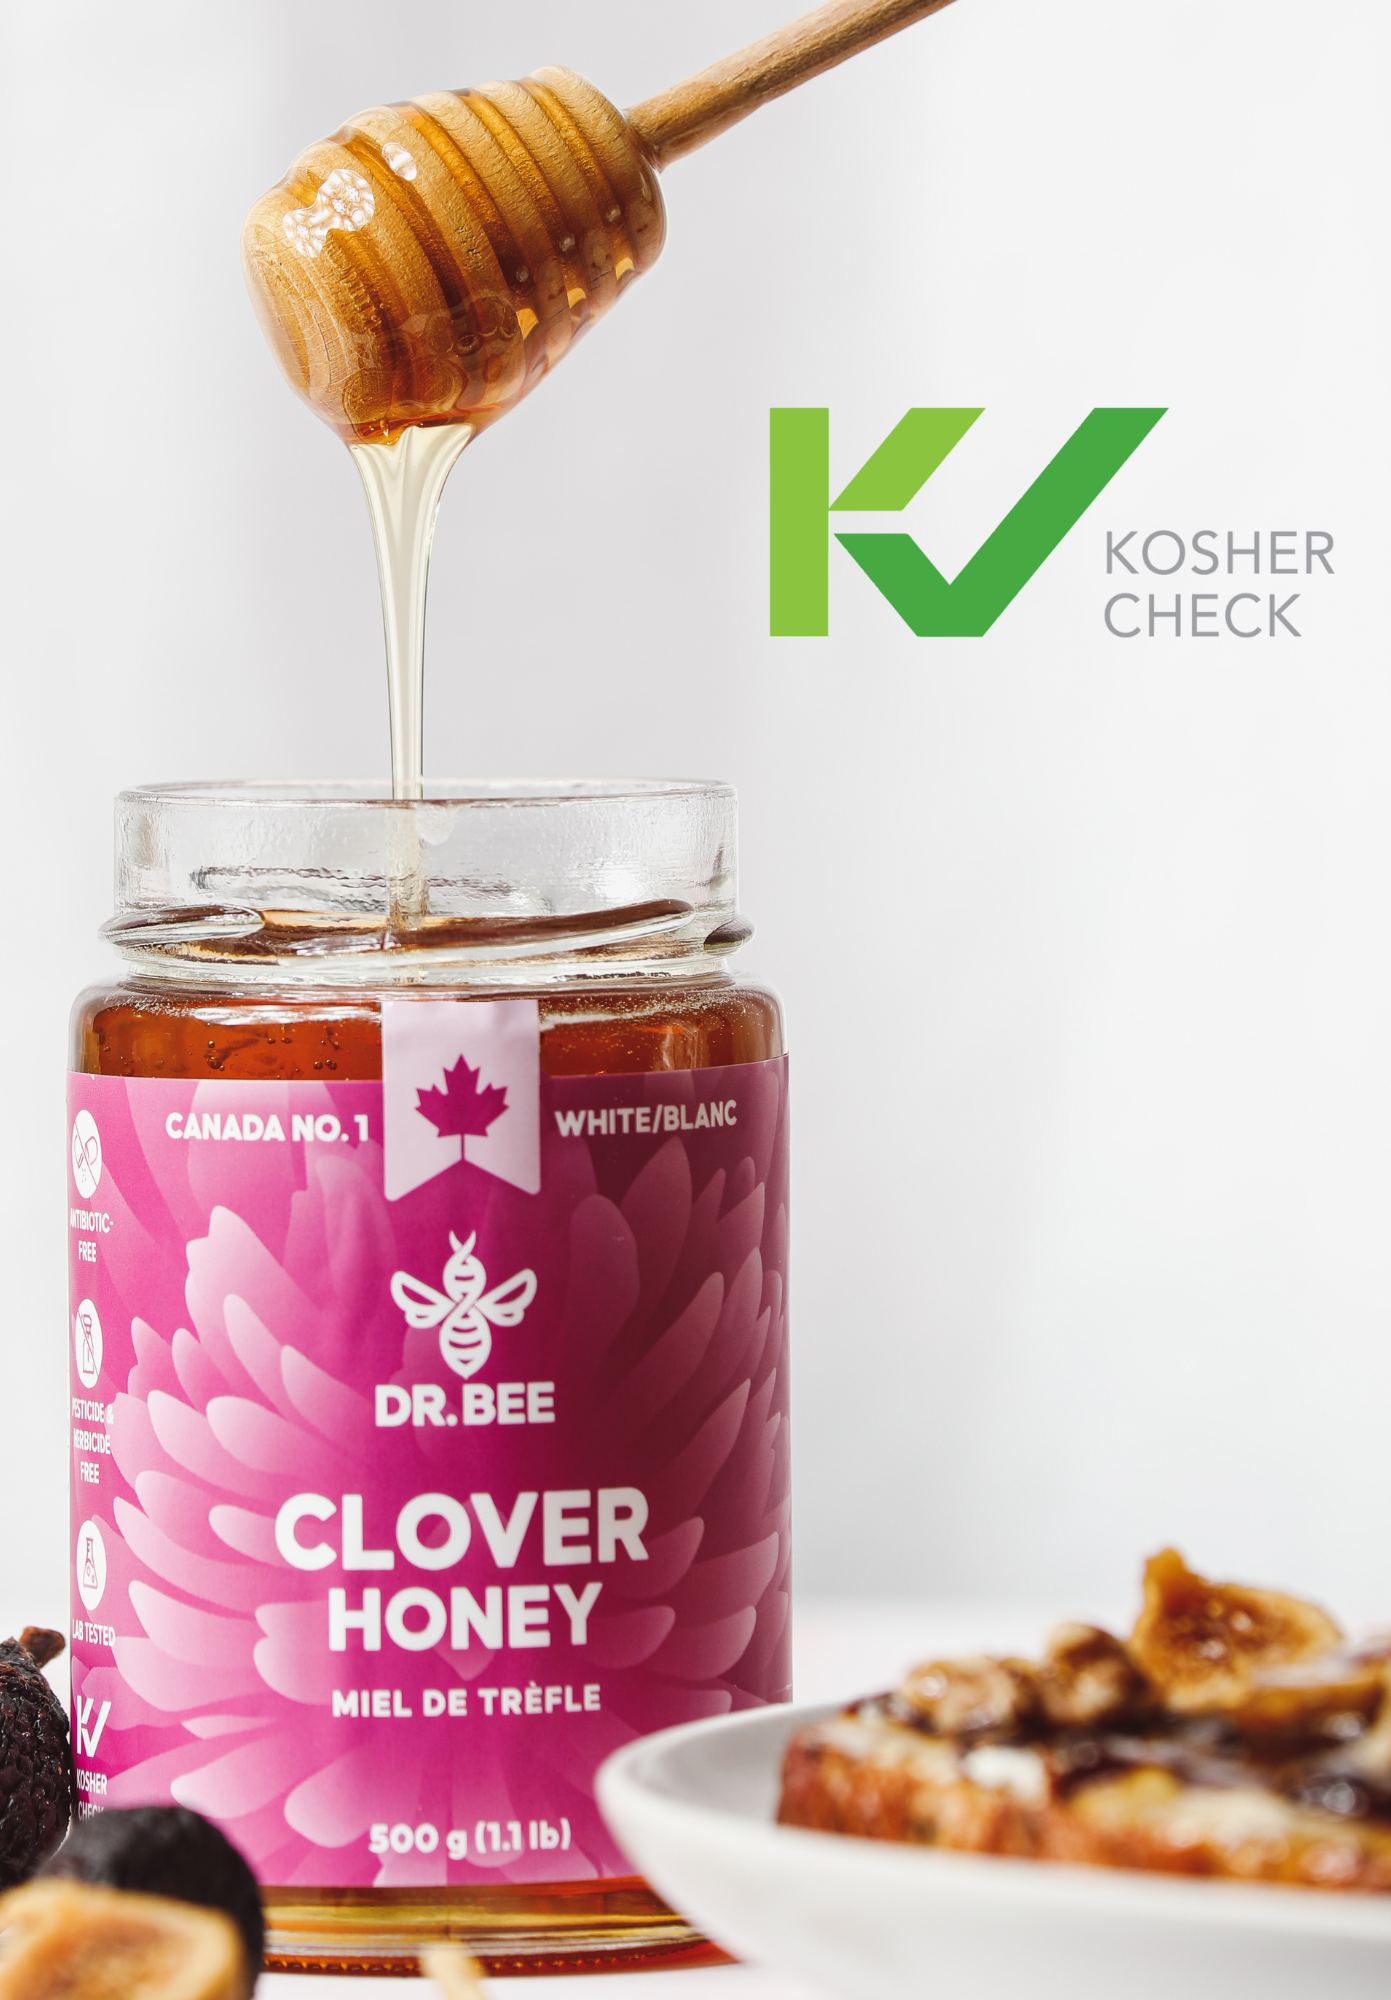 Dr. Bee is Kosher Check Certified!